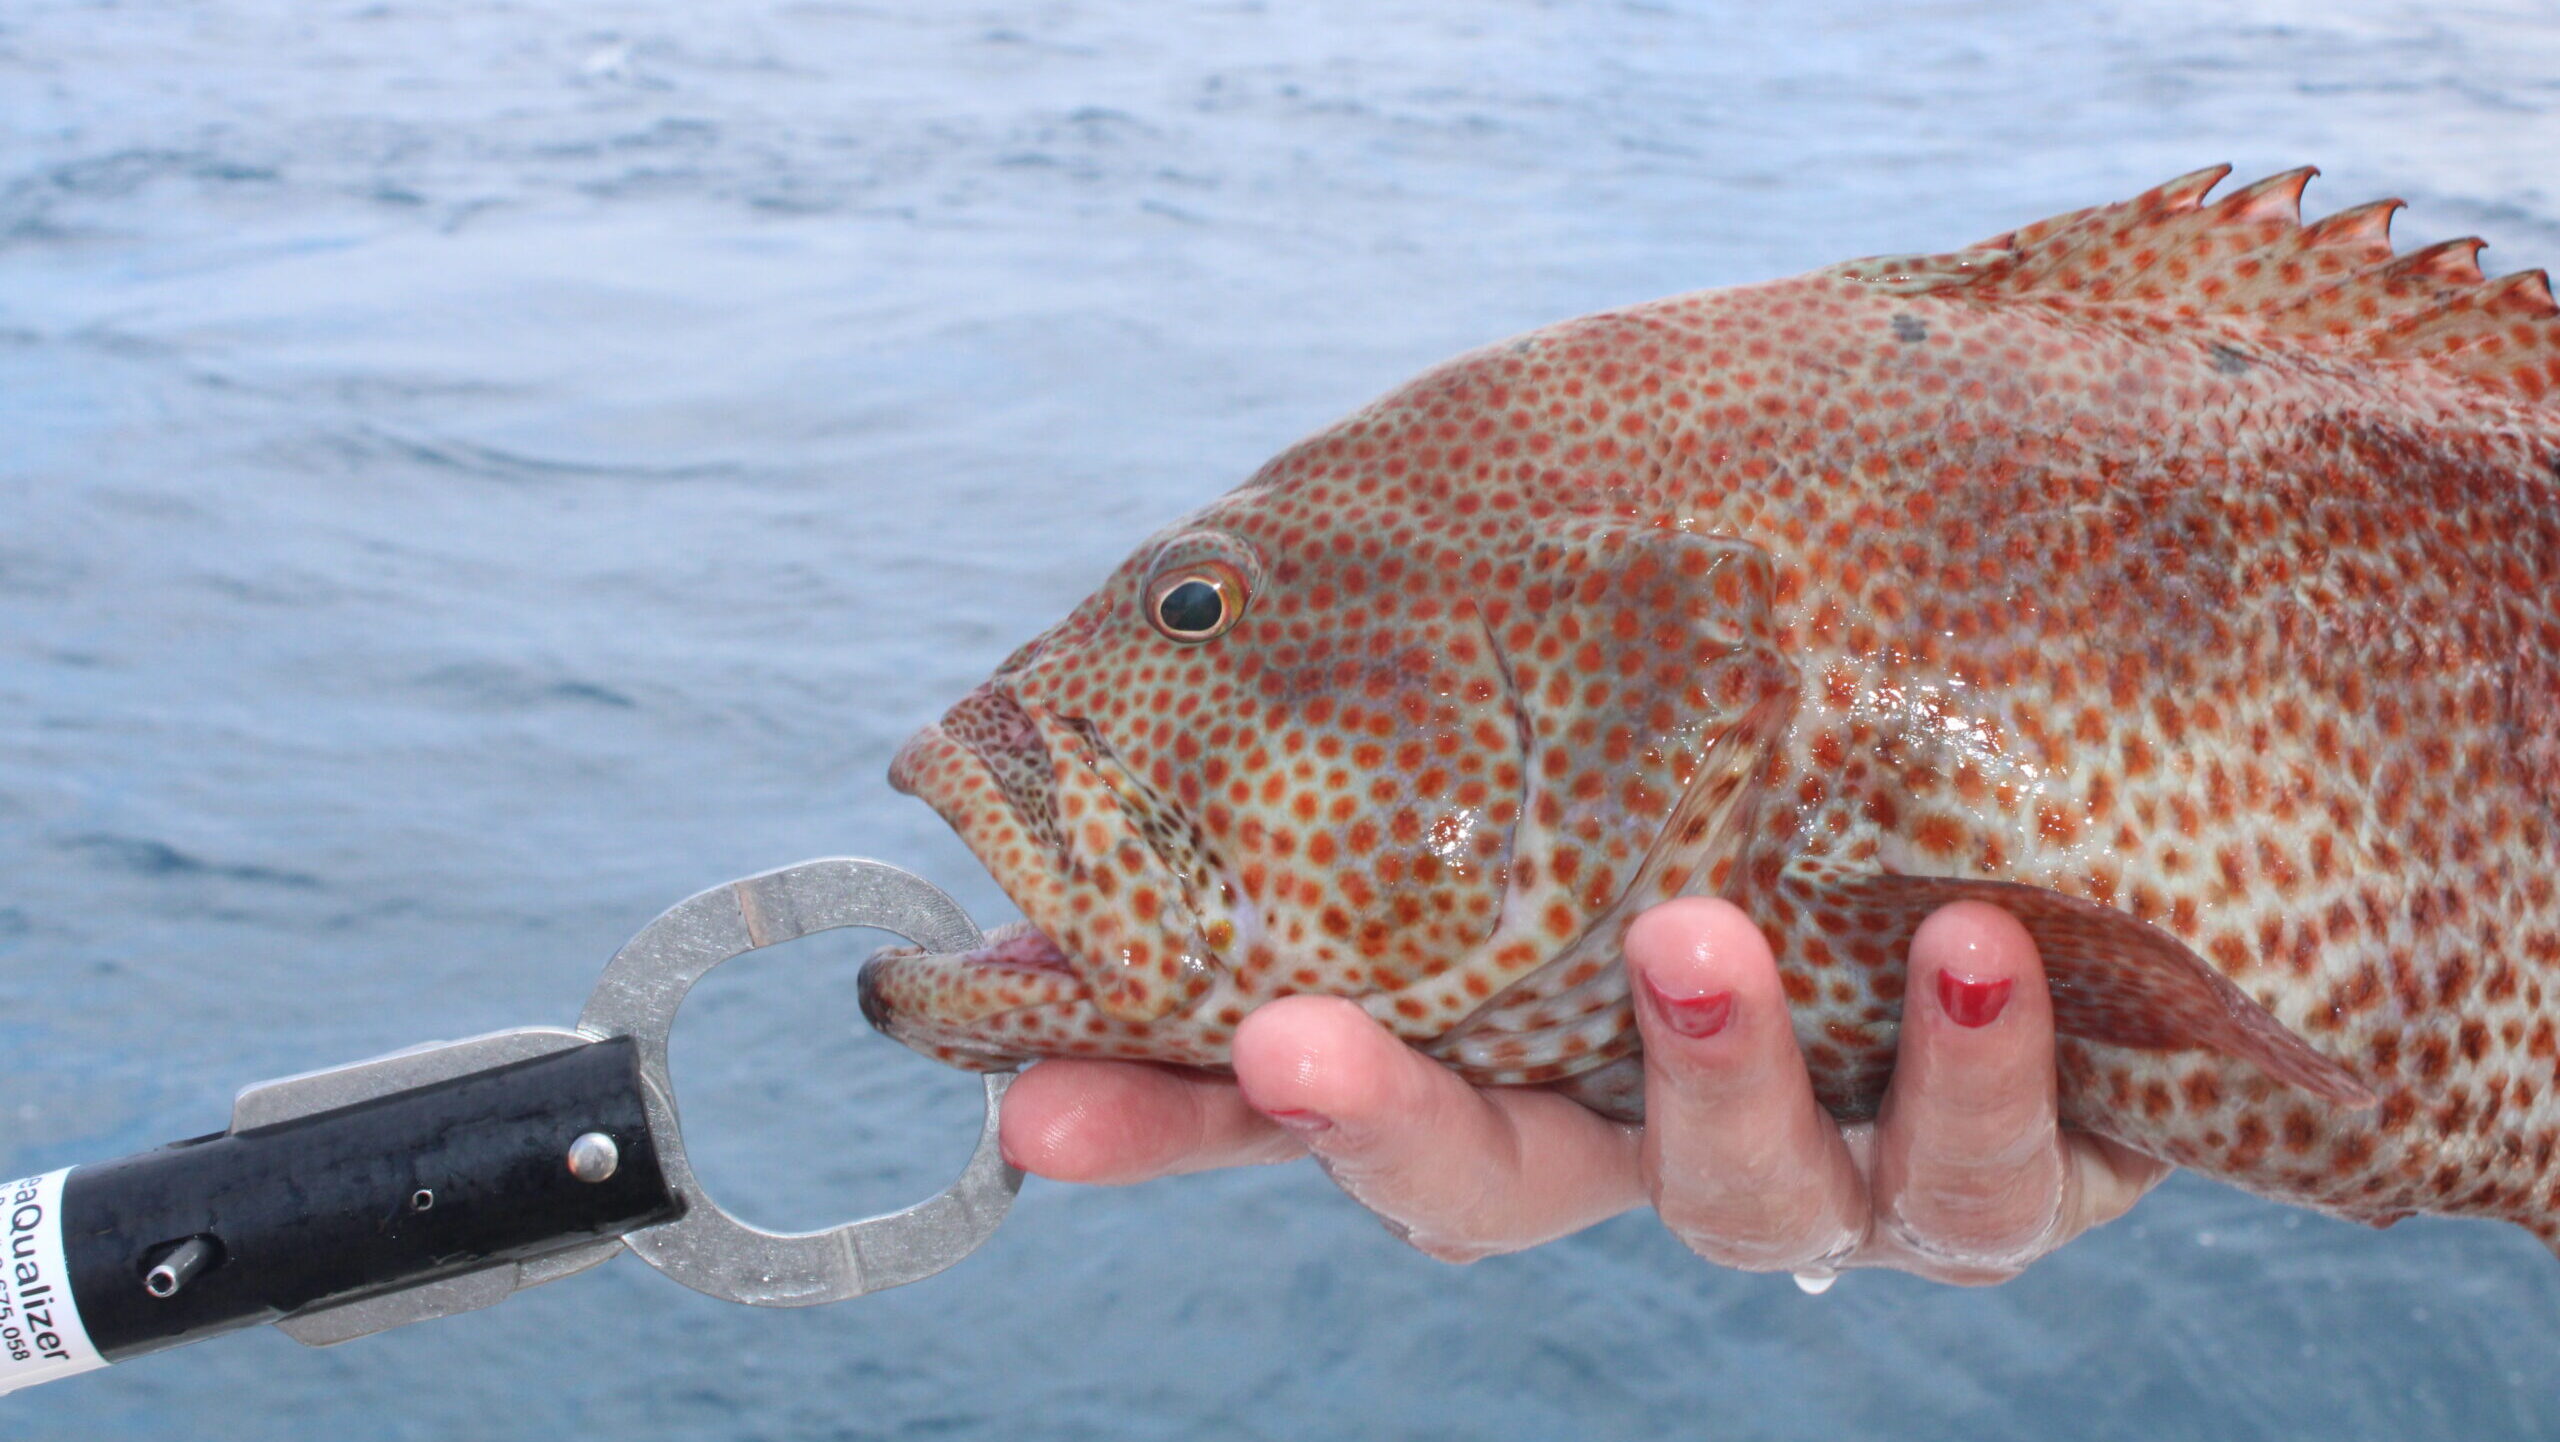 a graysby grouper about to be released with the aid of a descending device.